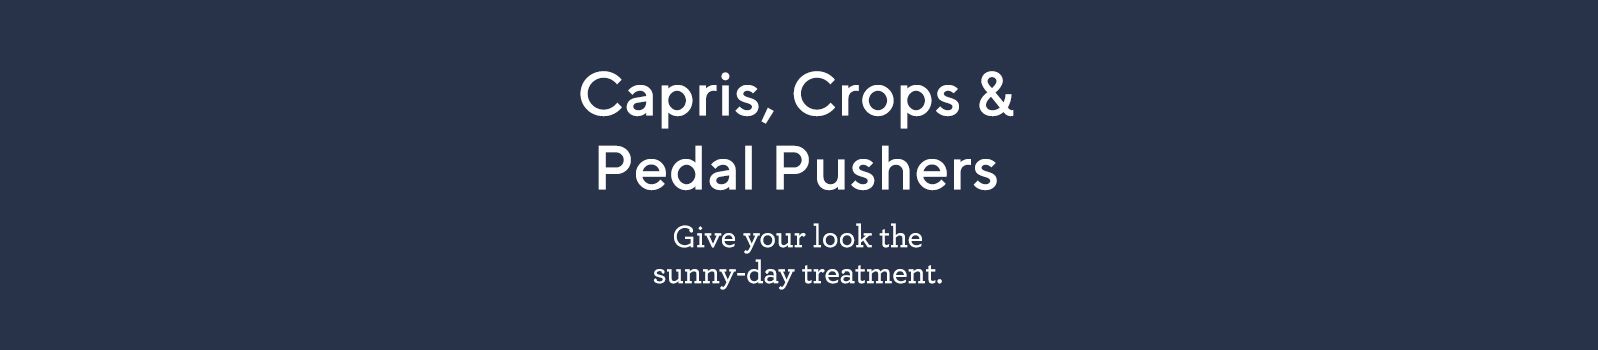 Capris, Crops & Pedal Pushers Give your look the sunny-day treatment!